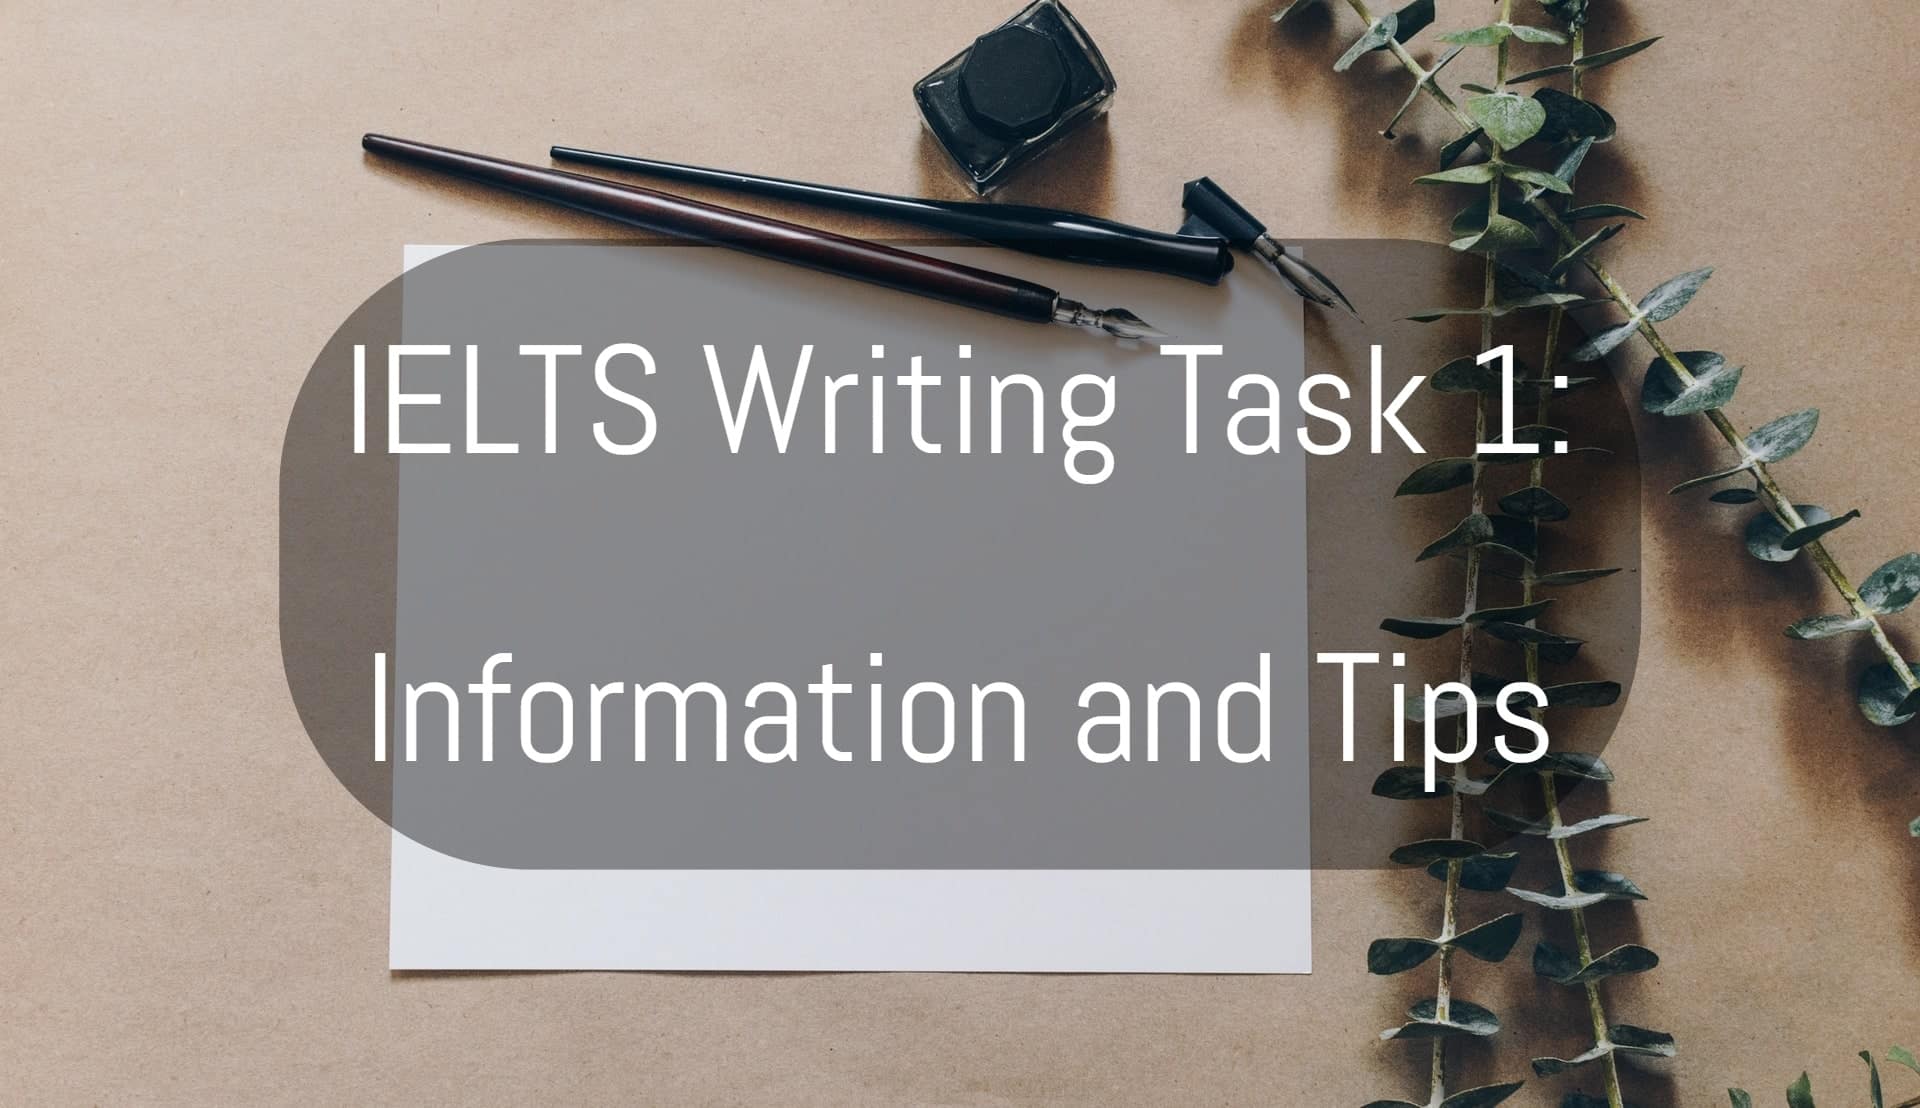 IELTS writing task 1 information and tips